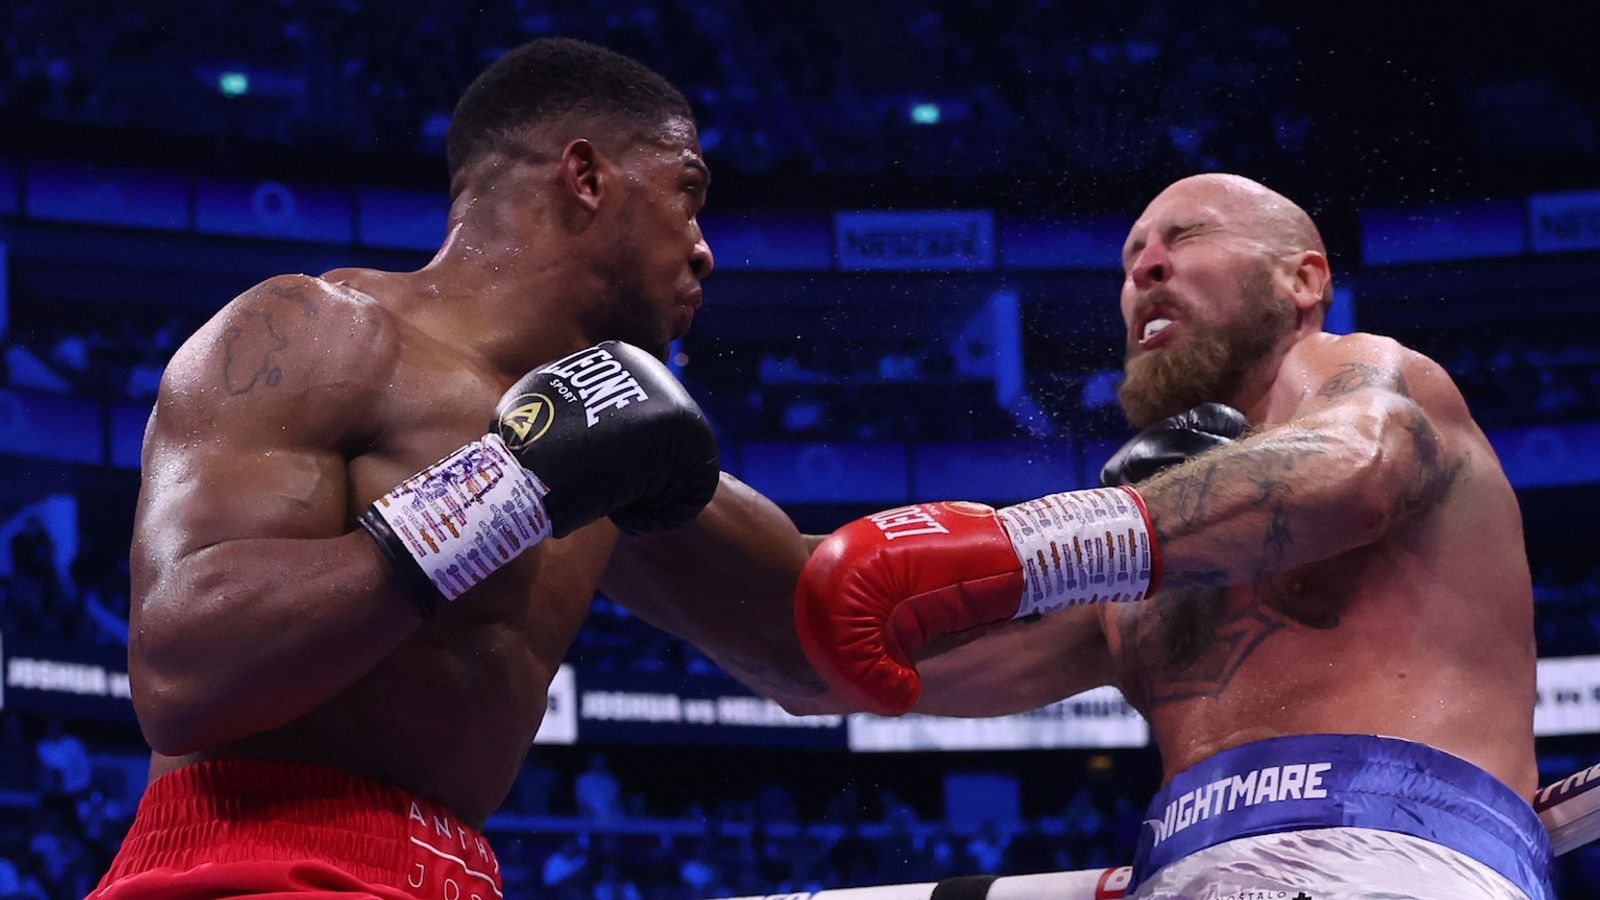 Anthony Joshua knocks out Robert Helenius in Round 7